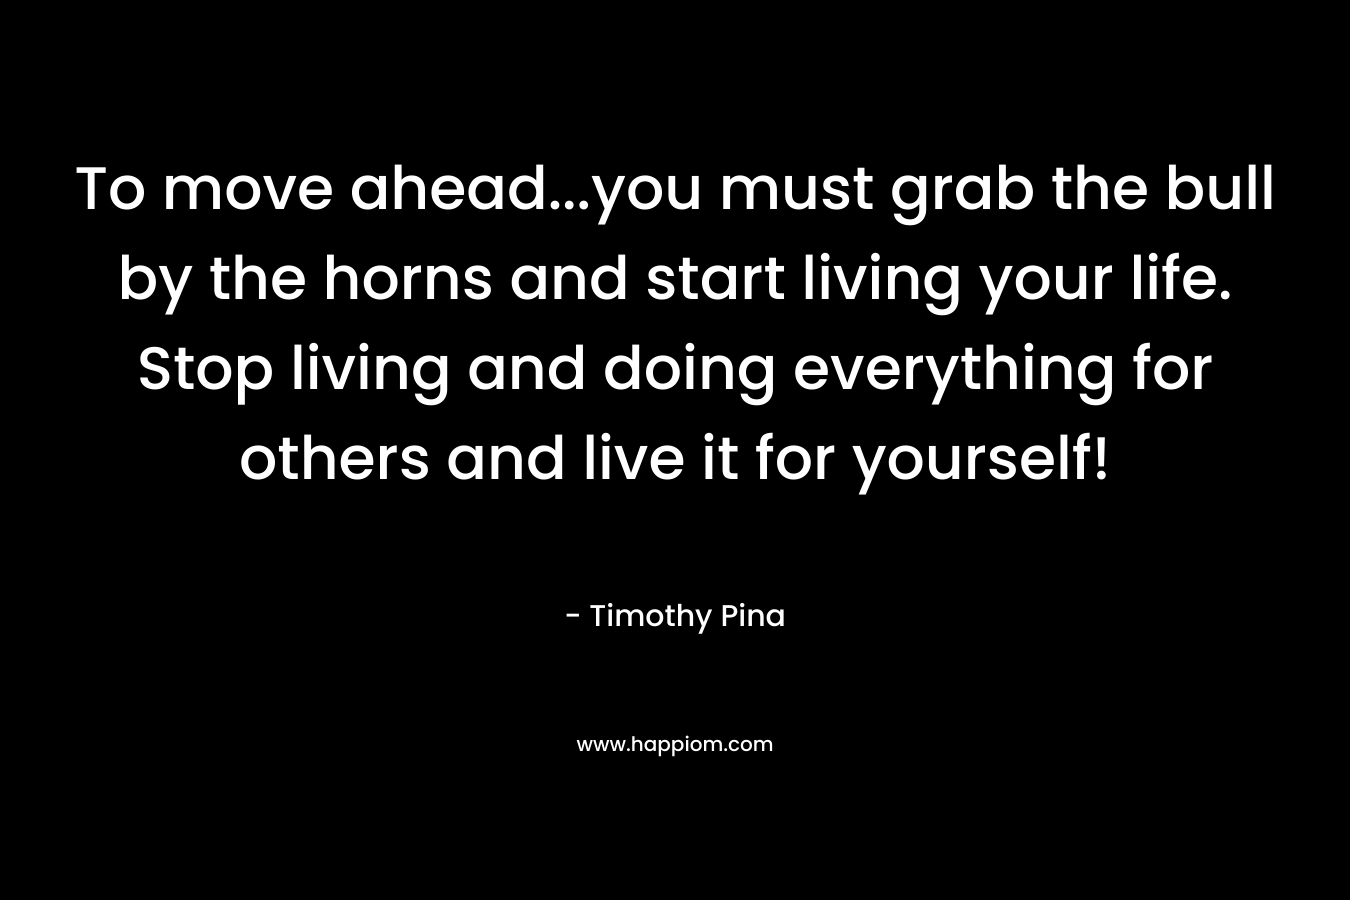 To move ahead…you must grab the bull by the horns and start living your life. Stop living and doing everything for others and live it for yourself! – Timothy Pina